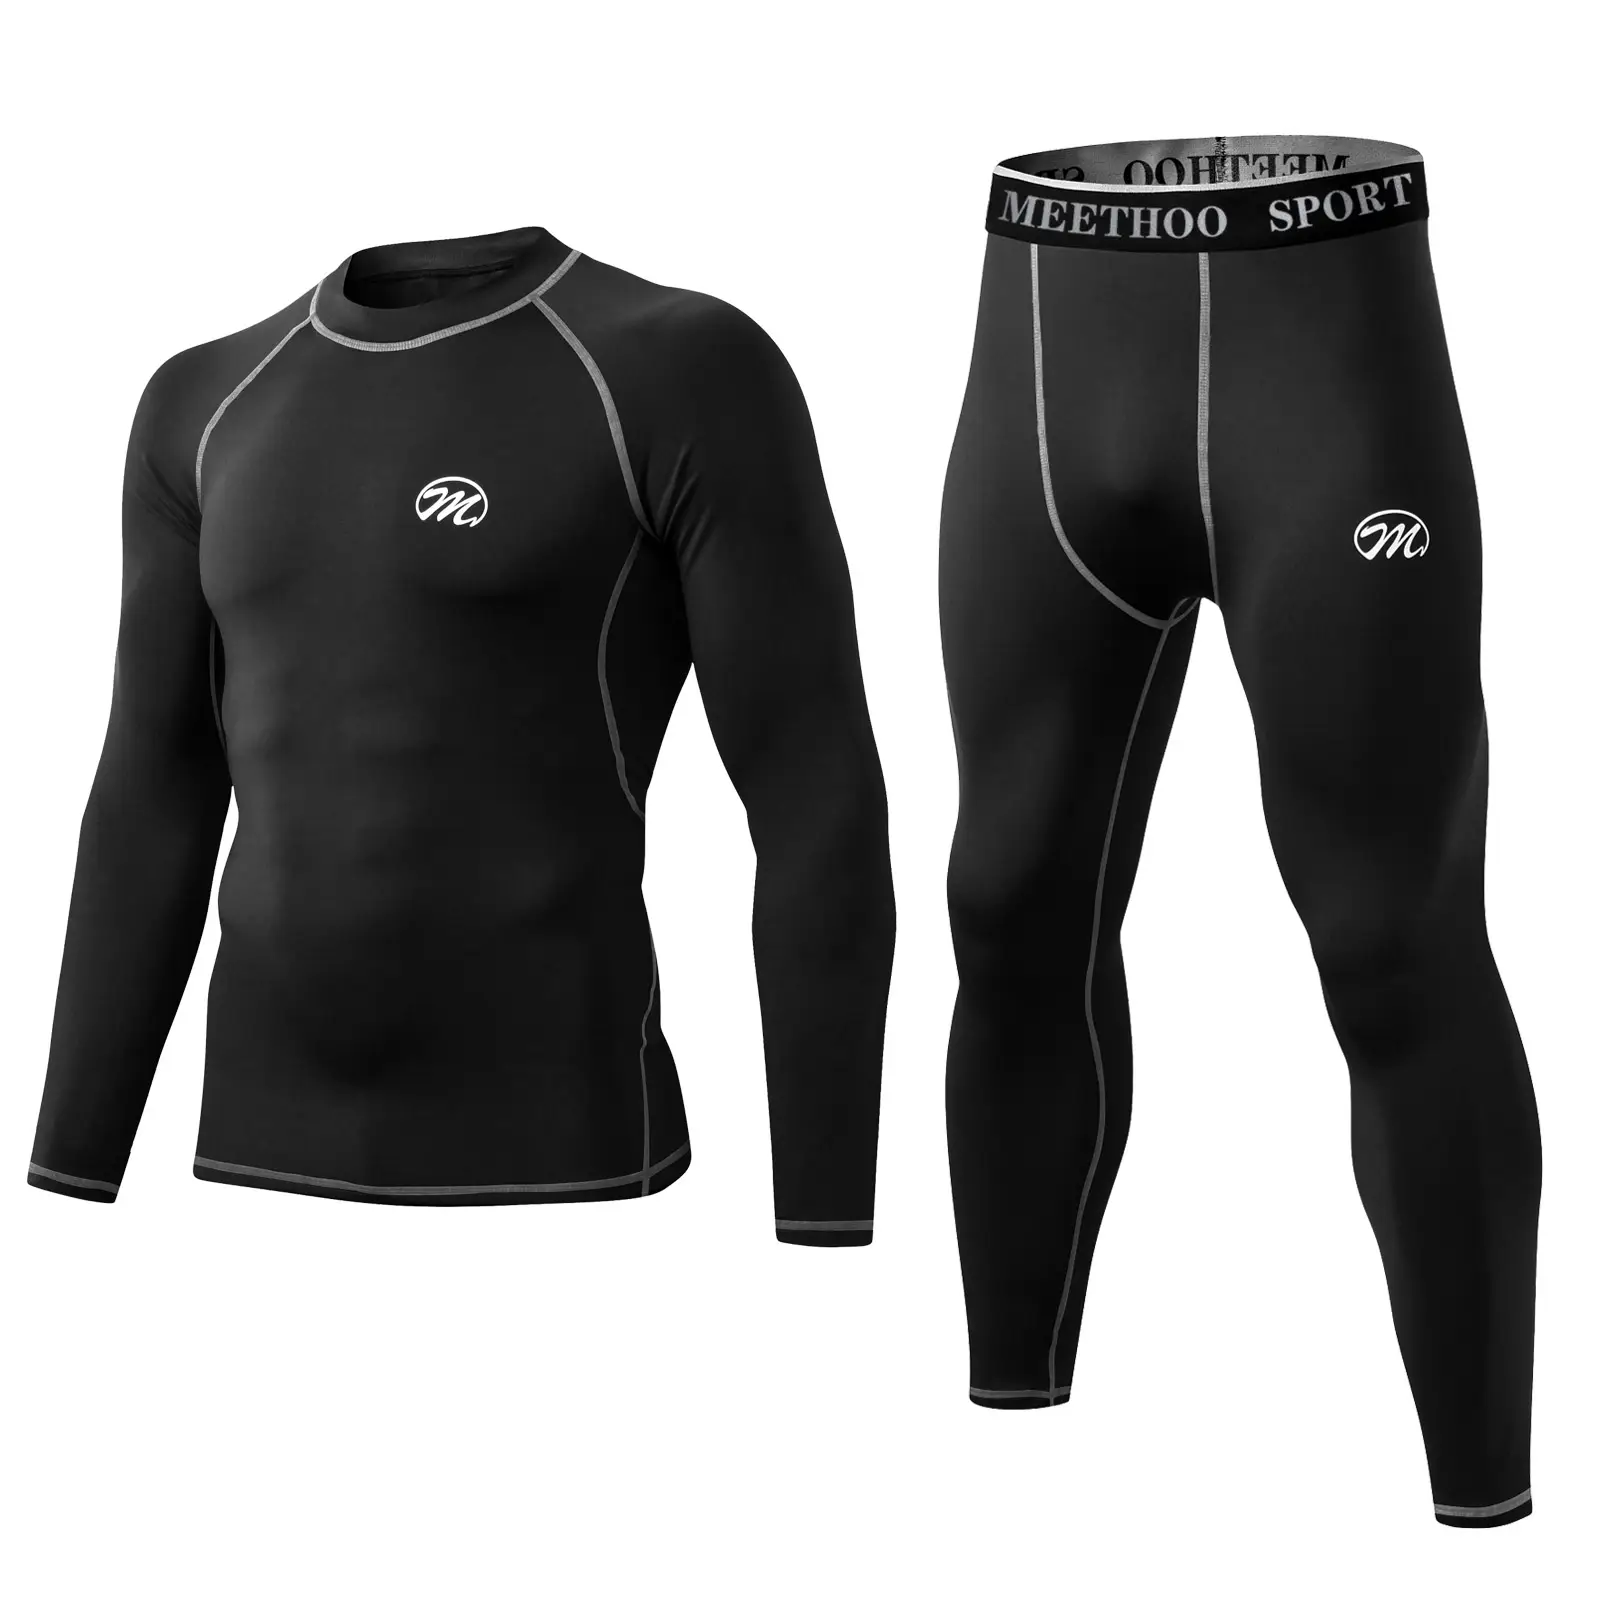 Winter Outdoor Sports Seamless Ultra Soft Thermal Long Johns Compression Function Thermal Underwear for Men